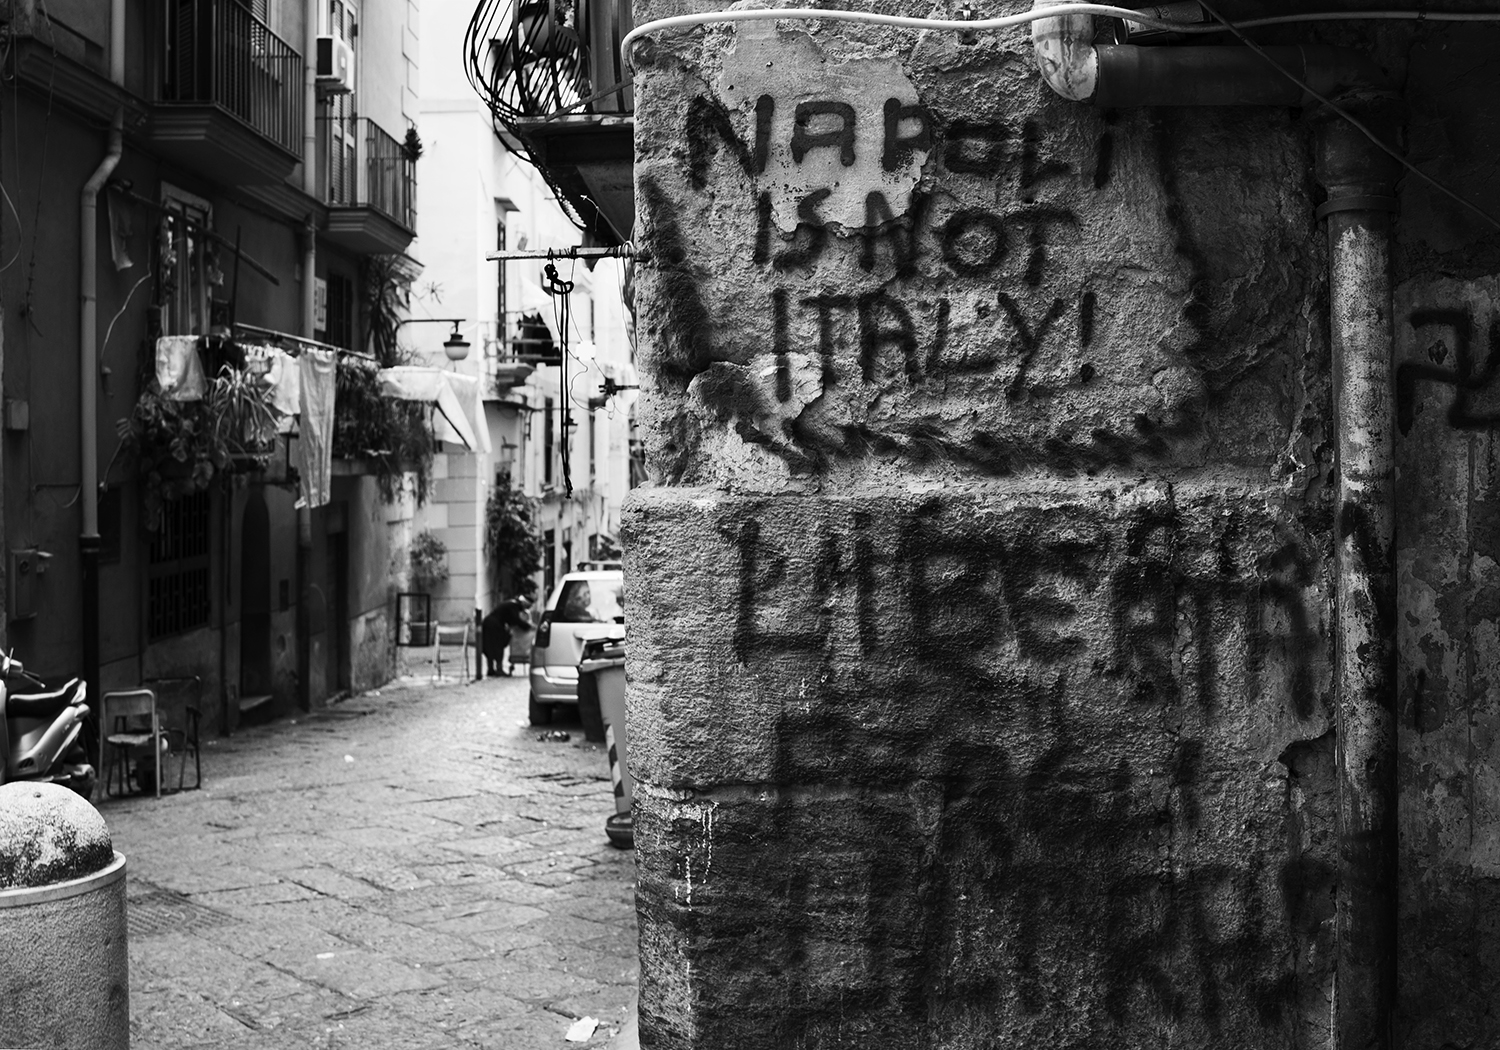 Napoli is not Italy